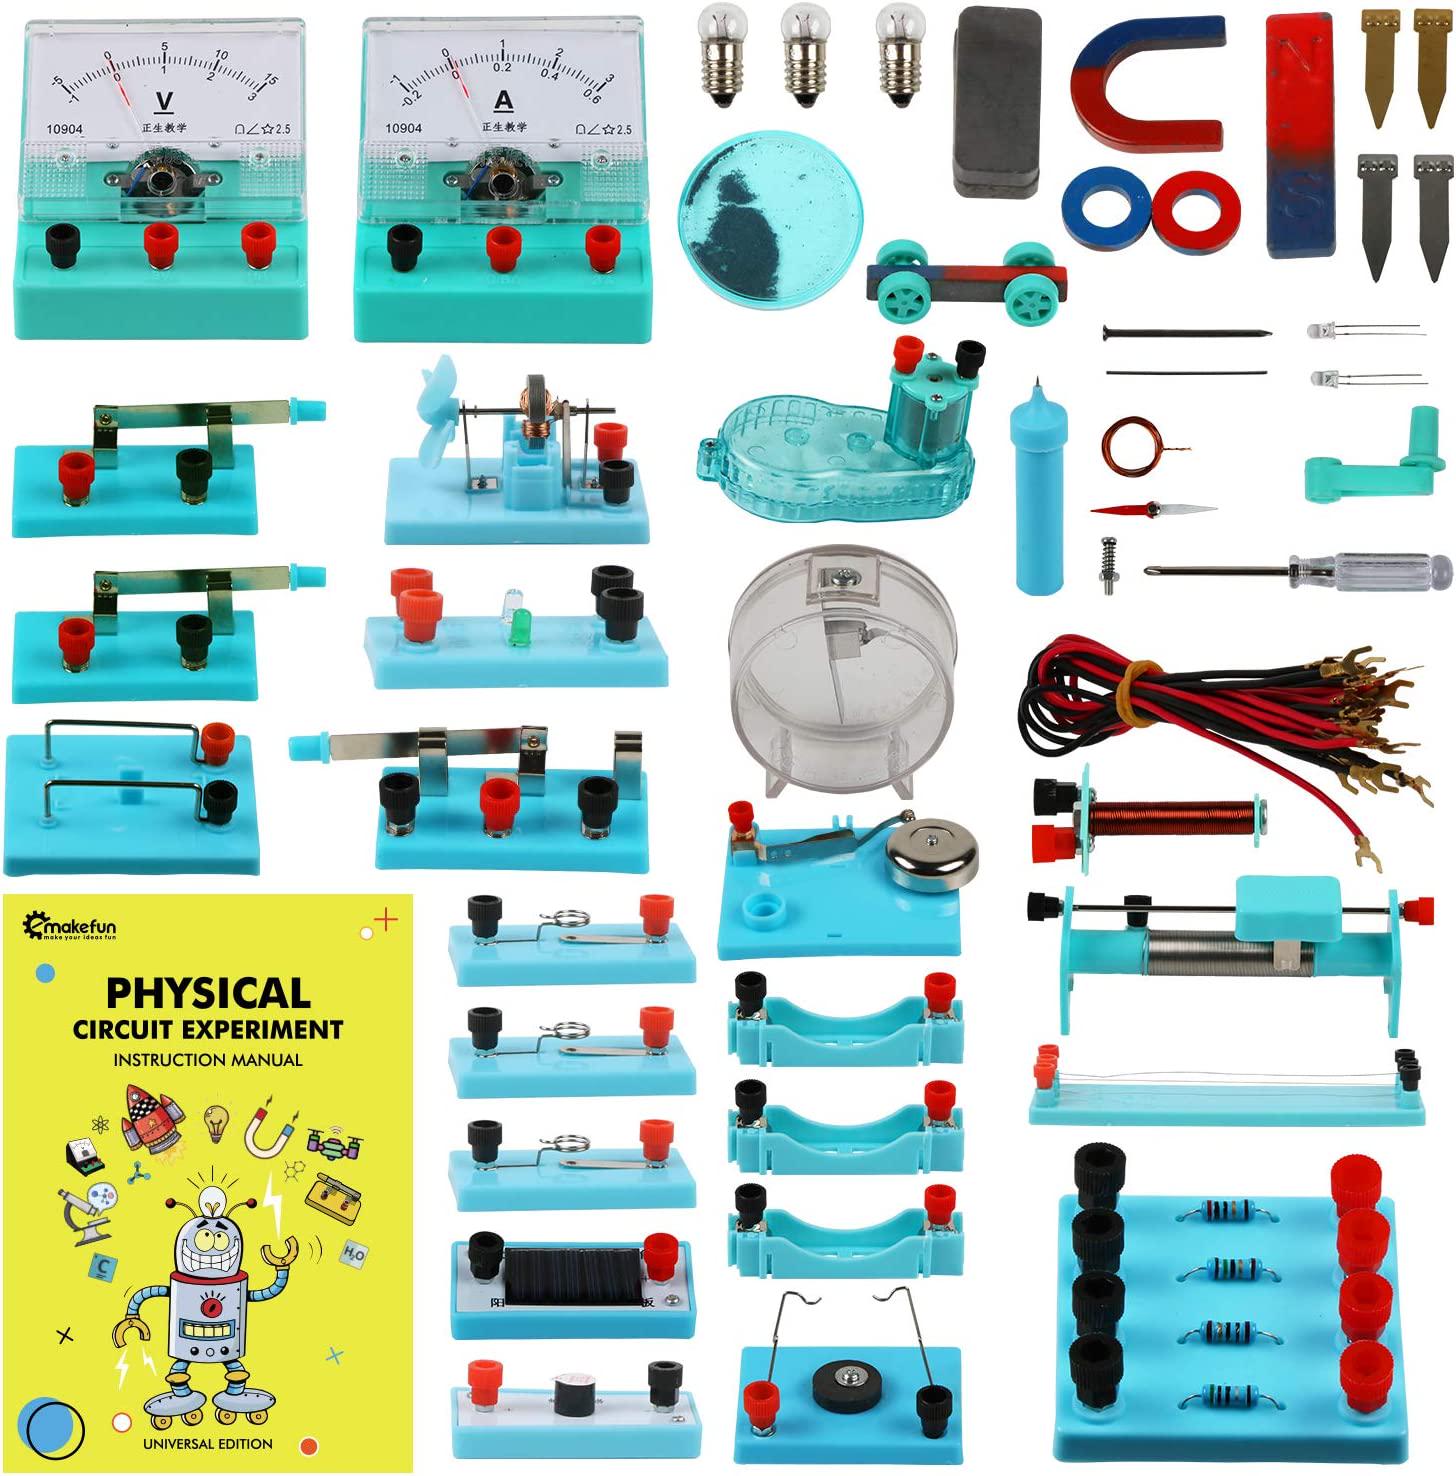 Emakefun, Emakefun STEM Physics Science Lab Basic Circuit Learning Starter Kit Electricity and Magnetism Experiment for Kids Junior Senior High School Students Electromagnetism Elementary Electronics